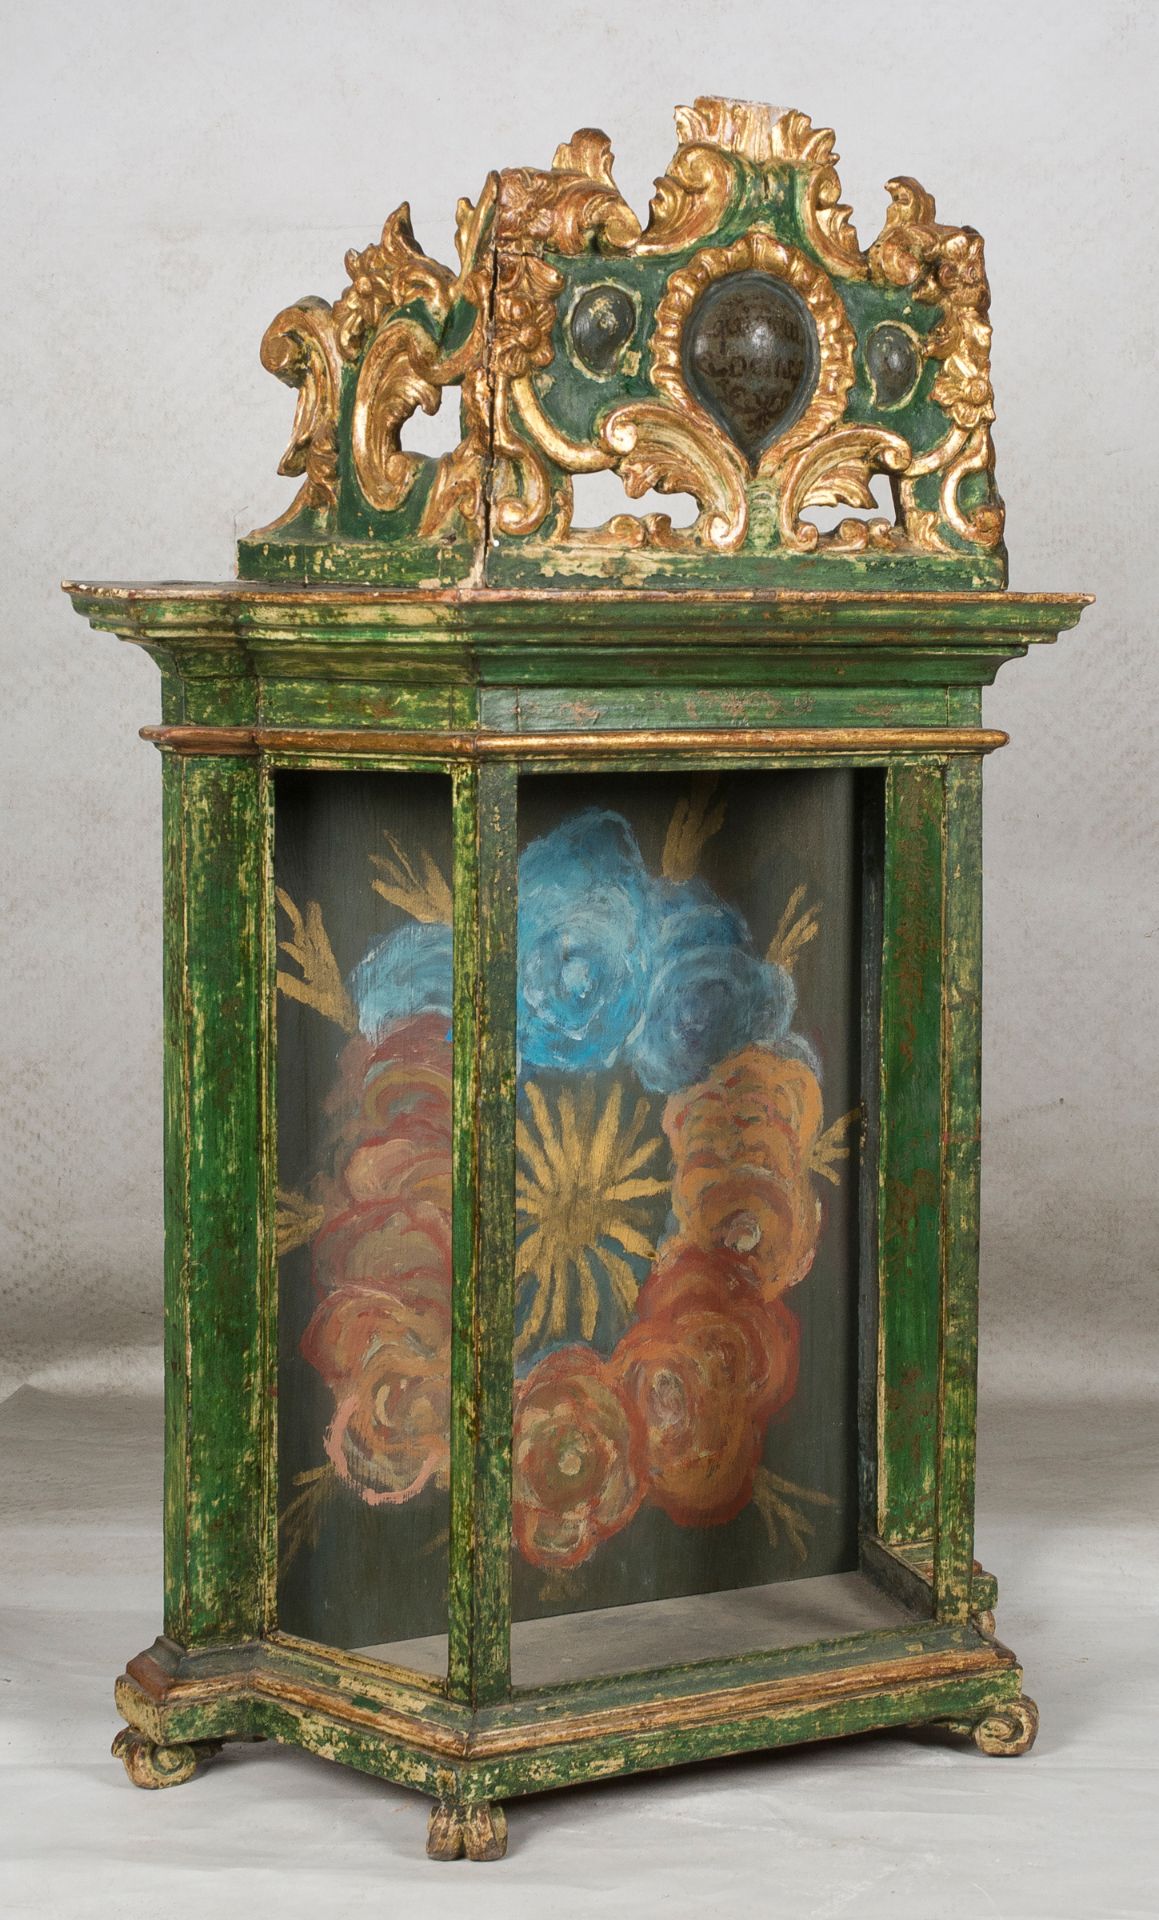 Pair of carved, polychromed and gilded wooden niches. Baroque. Late 17th century. 88 x 55 x 23 cm. - Bild 3 aus 6